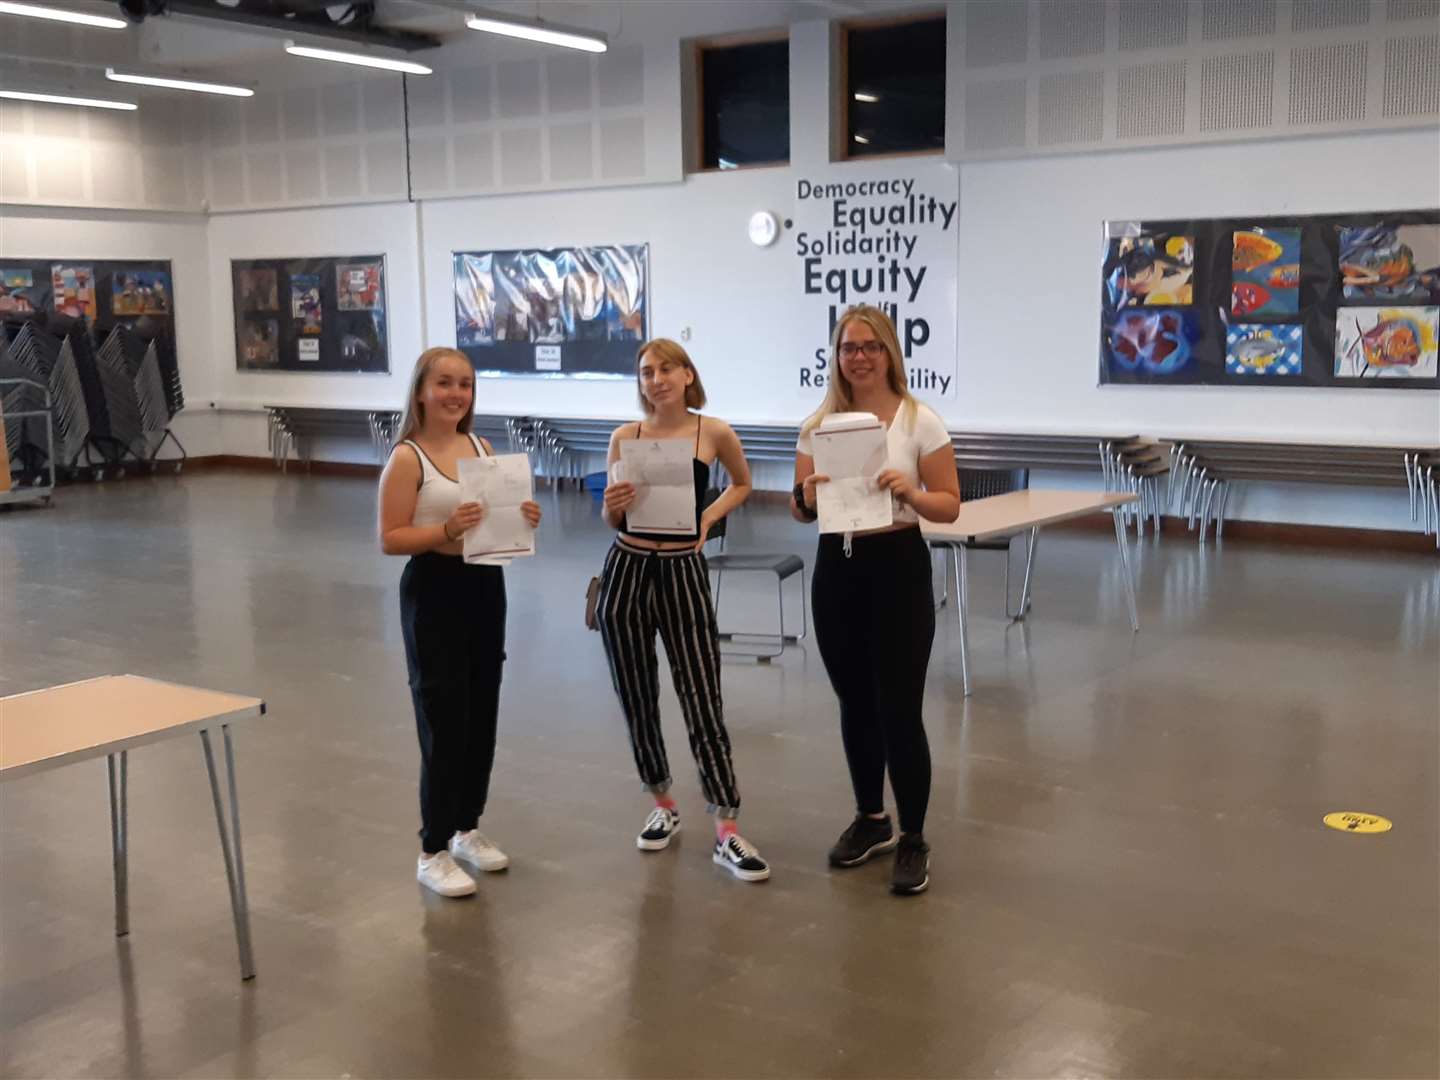 Pupils at Dartford Science and Technology College received their results today